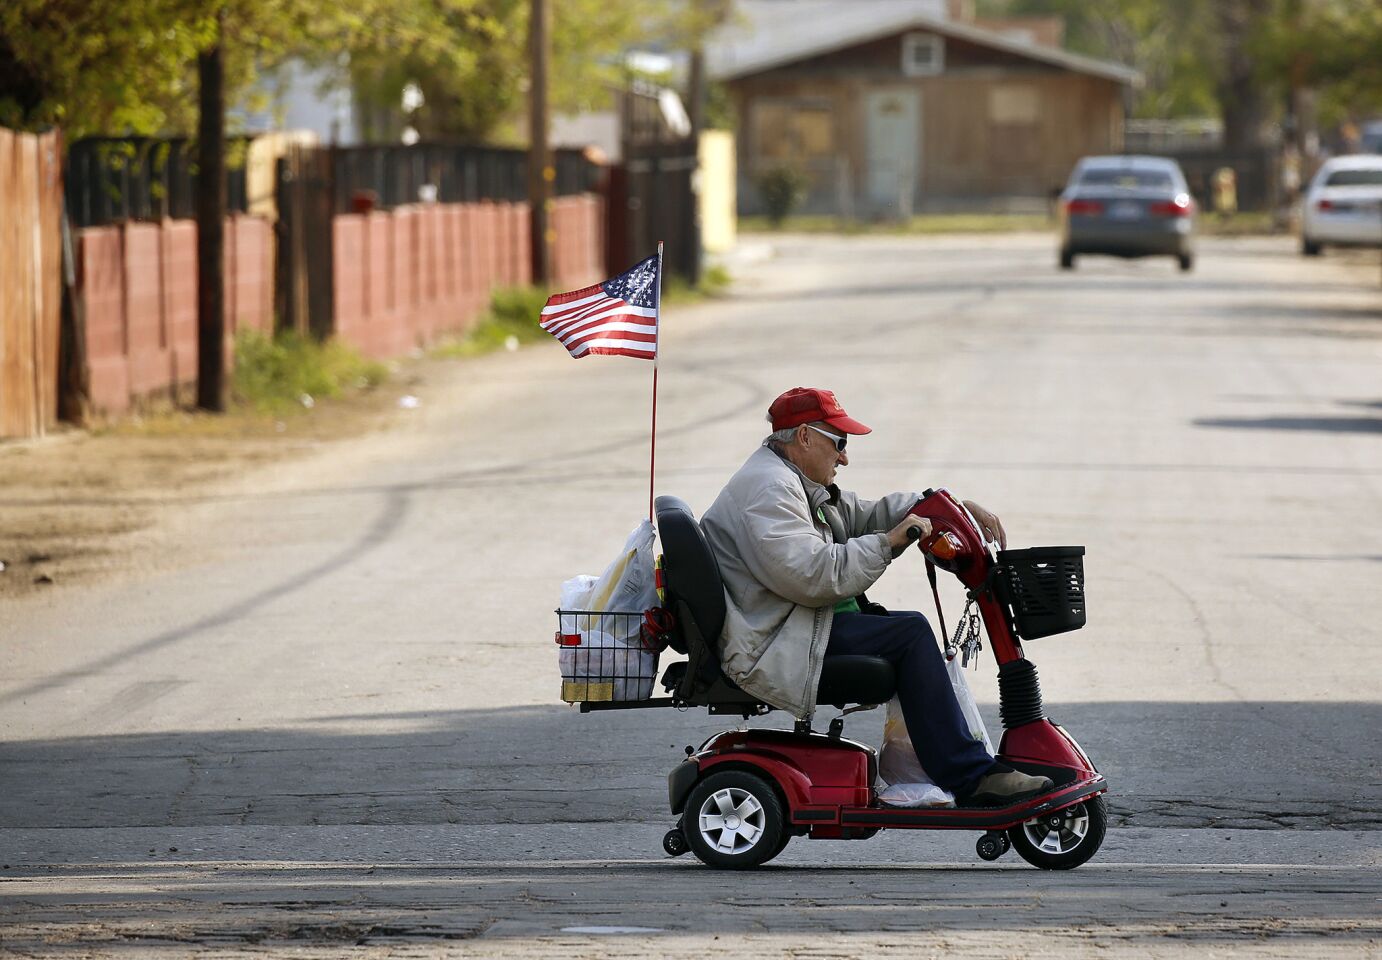 Leonard McGill, 73, proudly flies the American flag from his scooter while riding through Oildale, an unincorporated community in Kern County.